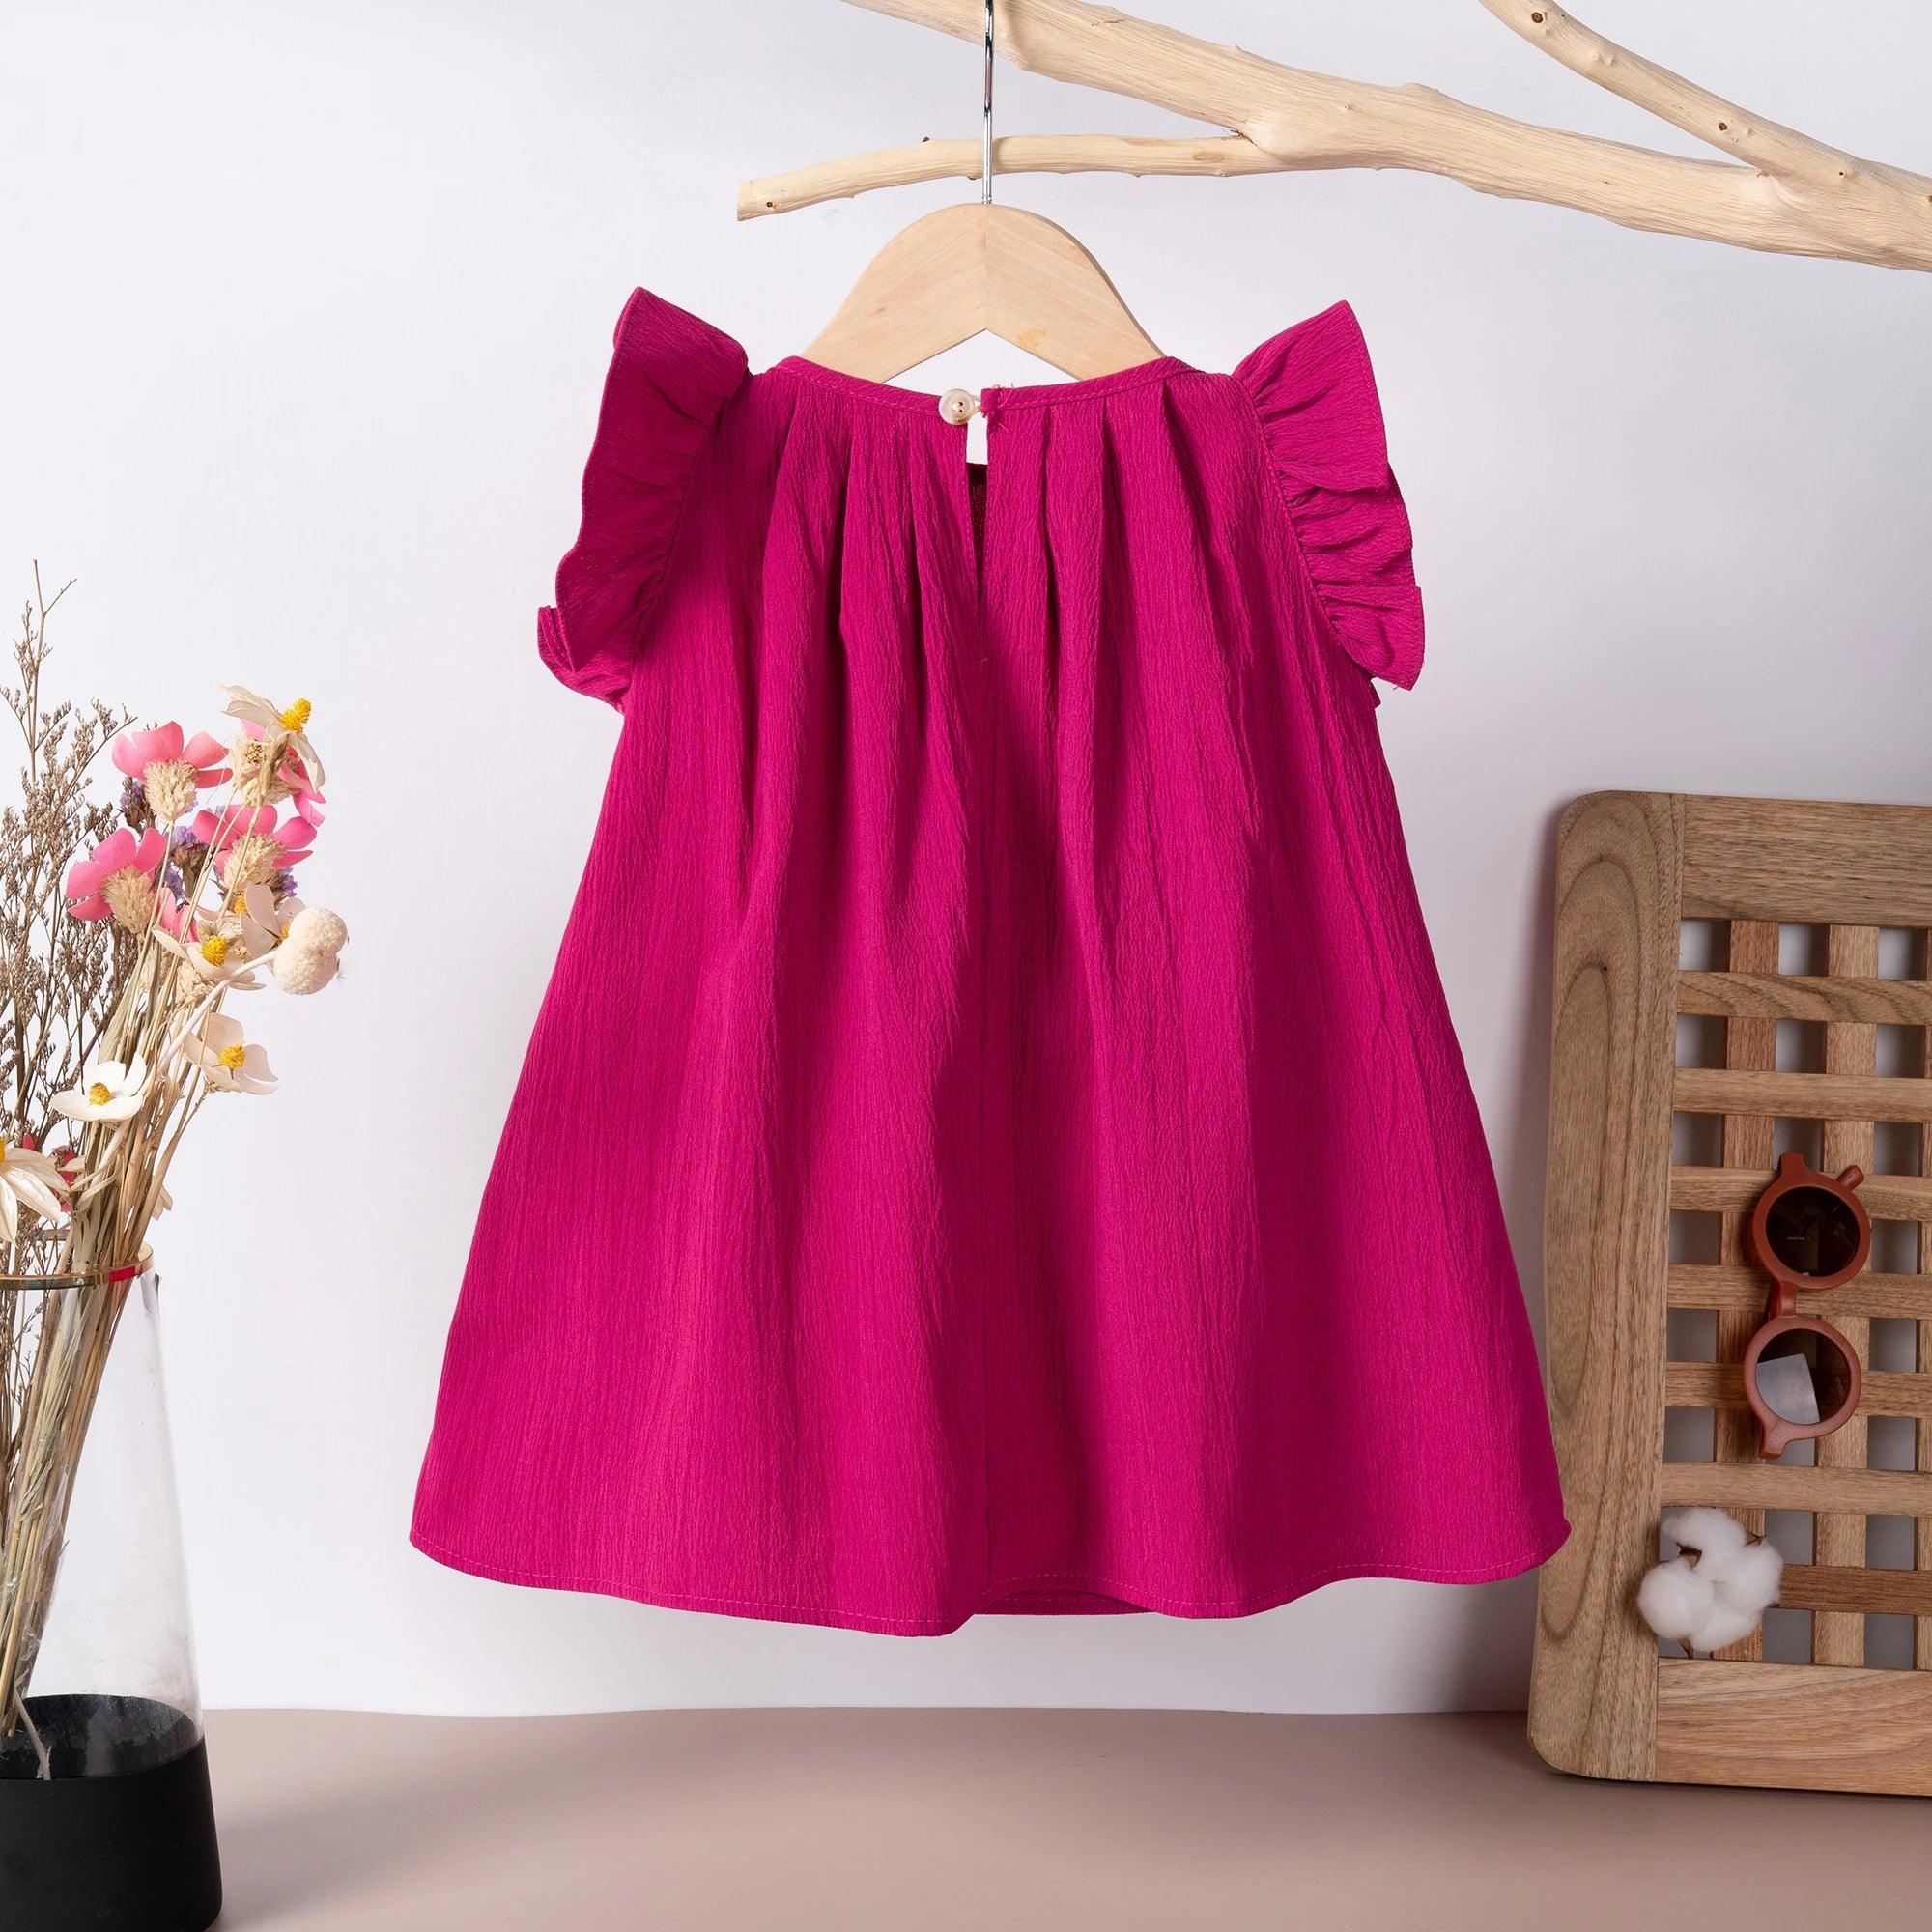 Korean Style Infant Girls Summer Dress with Flying Sleeves and Sweet Details  ourlum.com   